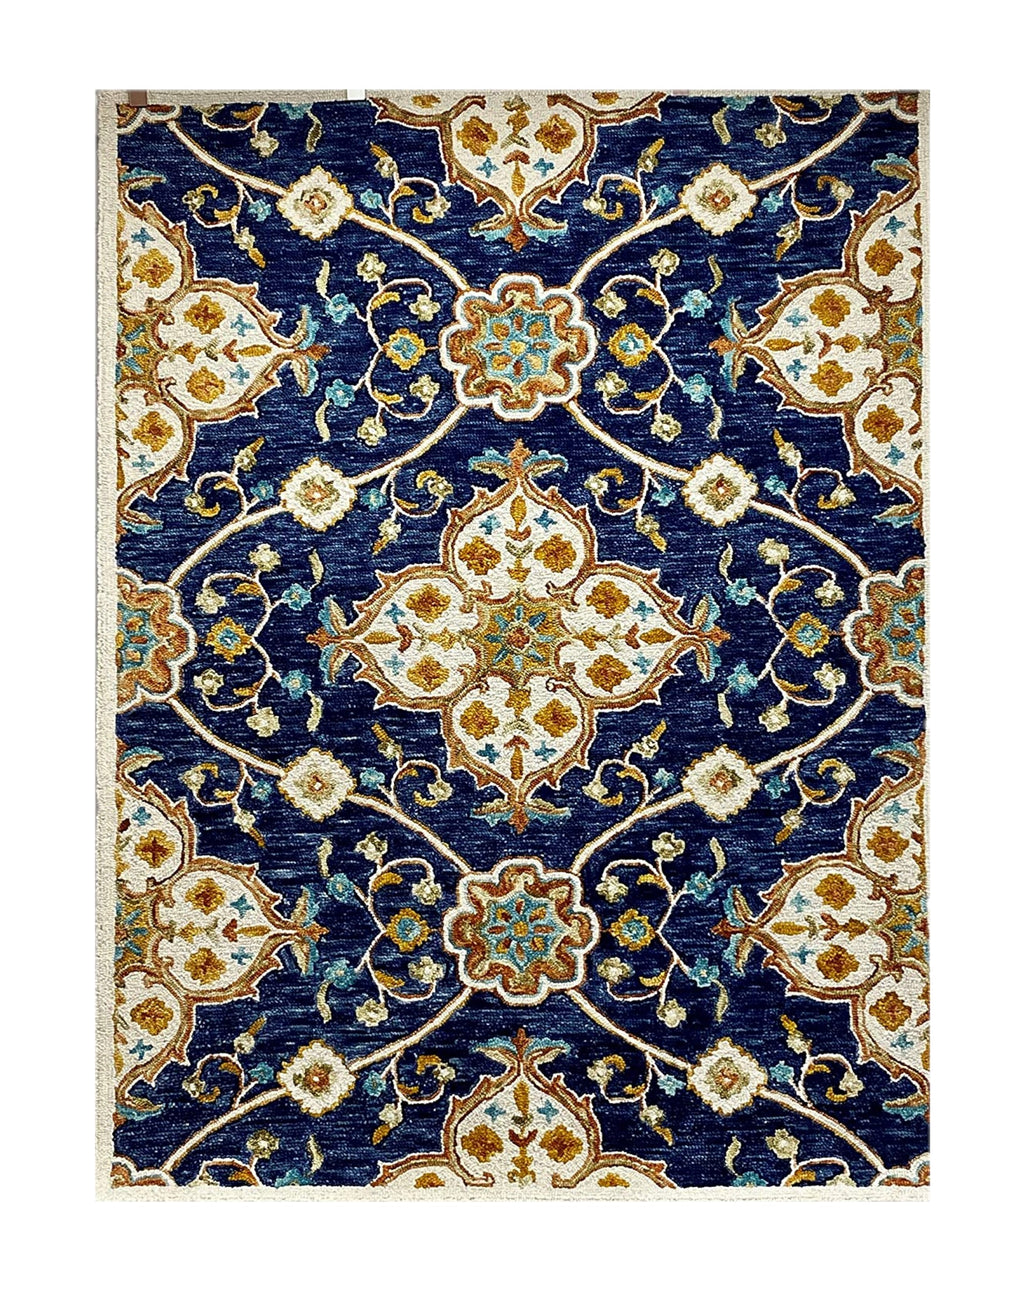 7’ x 9’ Blue and Gold Intricate Floral Area Rug